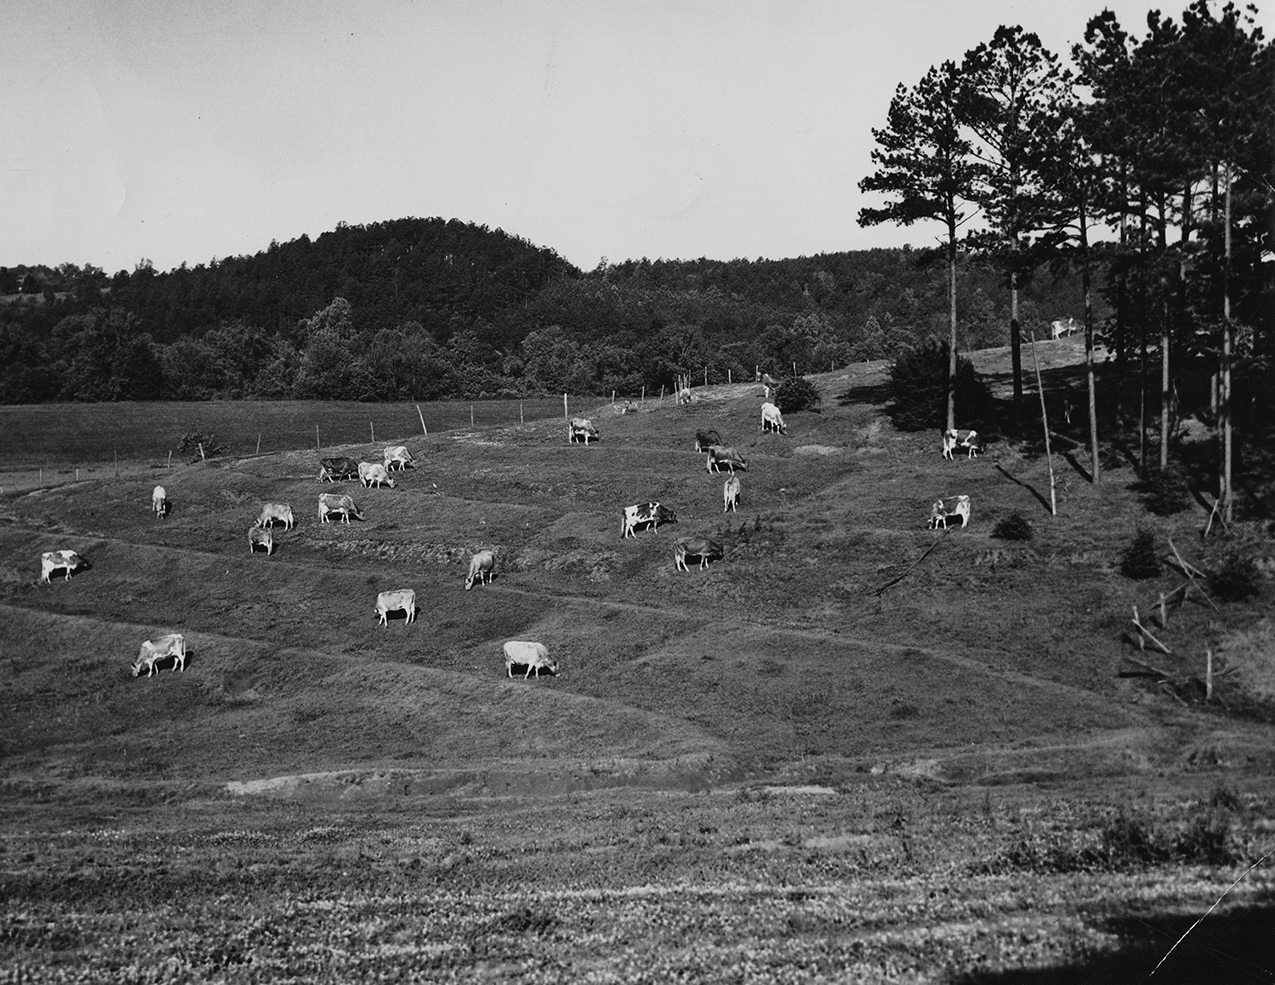 IV. Cows in pasture